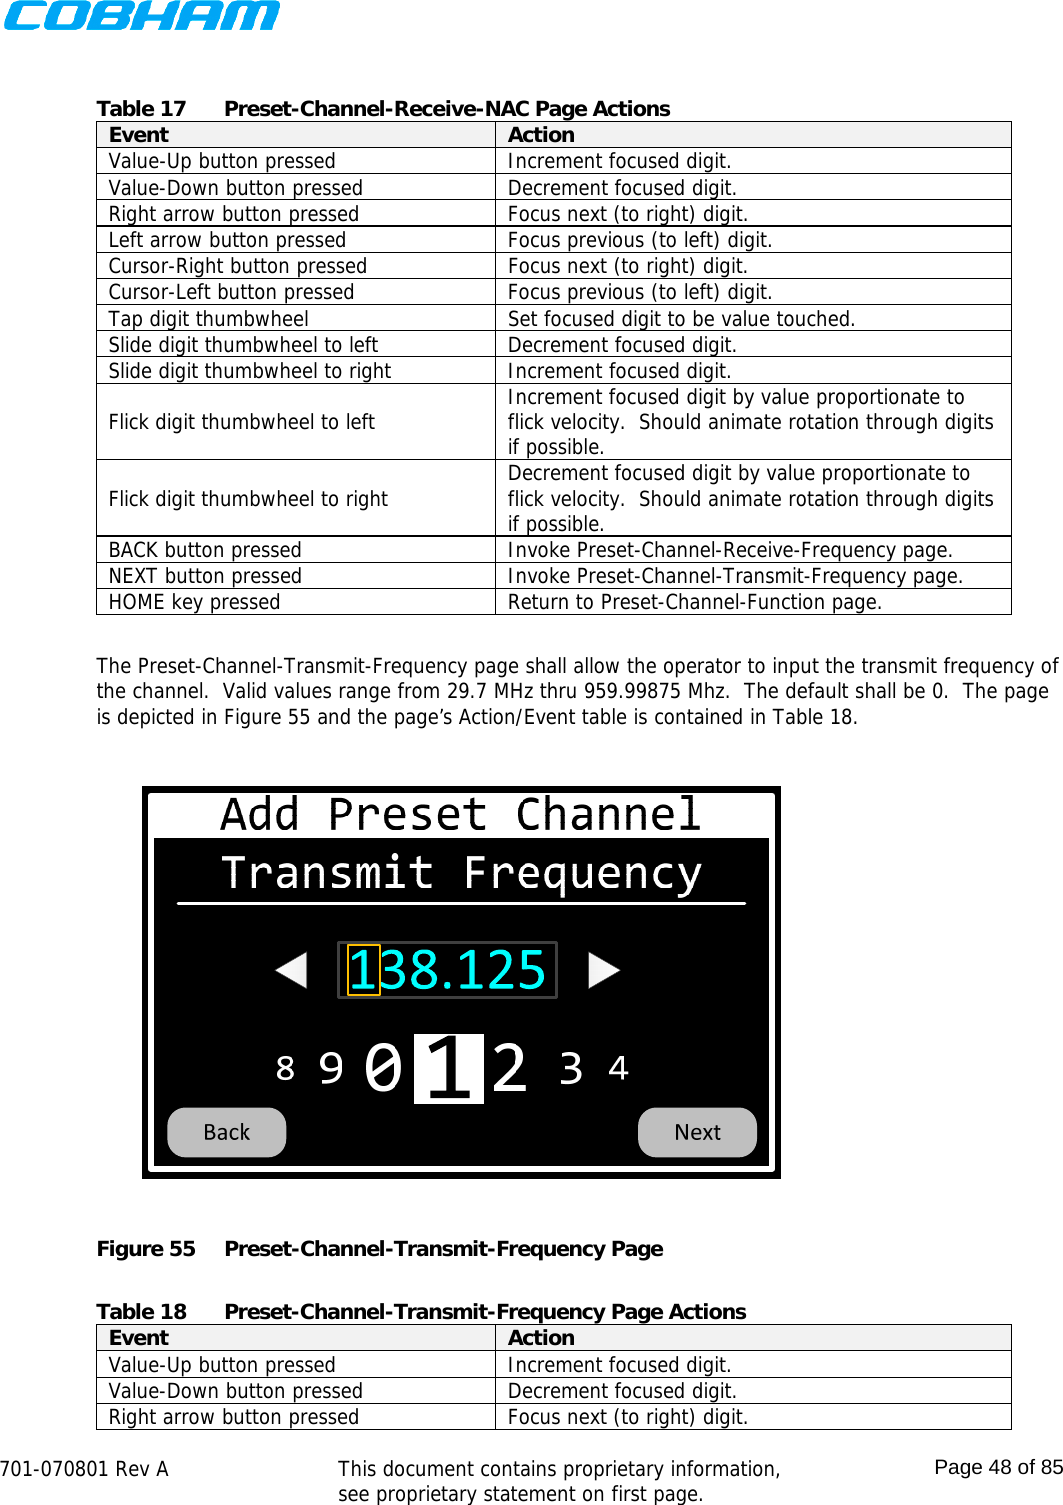    701-070801 Rev A   This document contains proprietary information, see proprietary statement on first page.  Page 48 of 85   Table 17  Preset-Channel-Receive-NAC Page Actions Event  Action Value-Up button pressed  Increment focused digit. Value-Down button pressed  Decrement focused digit. Right arrow button pressed  Focus next (to right) digit. Left arrow button pressed  Focus previous (to left) digit. Cursor-Right button pressed  Focus next (to right) digit. Cursor-Left button pressed  Focus previous (to left) digit. Tap digit thumbwheel  Set focused digit to be value touched. Slide digit thumbwheel to left  Decrement focused digit. Slide digit thumbwheel to right  Increment focused digit. Flick digit thumbwheel to left  Increment focused digit by value proportionate to flick velocity.  Should animate rotation through digits if possible. Flick digit thumbwheel to right  Decrement focused digit by value proportionate to flick velocity.  Should animate rotation through digits if possible. BACK button pressed  Invoke Preset-Channel-Receive-Frequency page. NEXT button pressed  Invoke Preset-Channel-Transmit-Frequency page. HOME key pressed  Return to Preset-Channel-Function page.  The Preset-Channel-Transmit-Frequency page shall allow the operator to input the transmit frequency of the channel.  Valid values range from 29.7 MHz thru 959.99875 Mhz.  The default shall be 0.  The page is depicted in Figure 55 and the page’s Action/Event table is contained in Table 18.  Figure 55  Preset-Channel-Transmit-Frequency Page  Table 18  Preset-Channel-Transmit-Frequency Page Actions Event  Action Value-Up button pressed  Increment focused digit. Value-Down button pressed  Decrement focused digit. Right arrow button pressed  Focus next (to right) digit. 